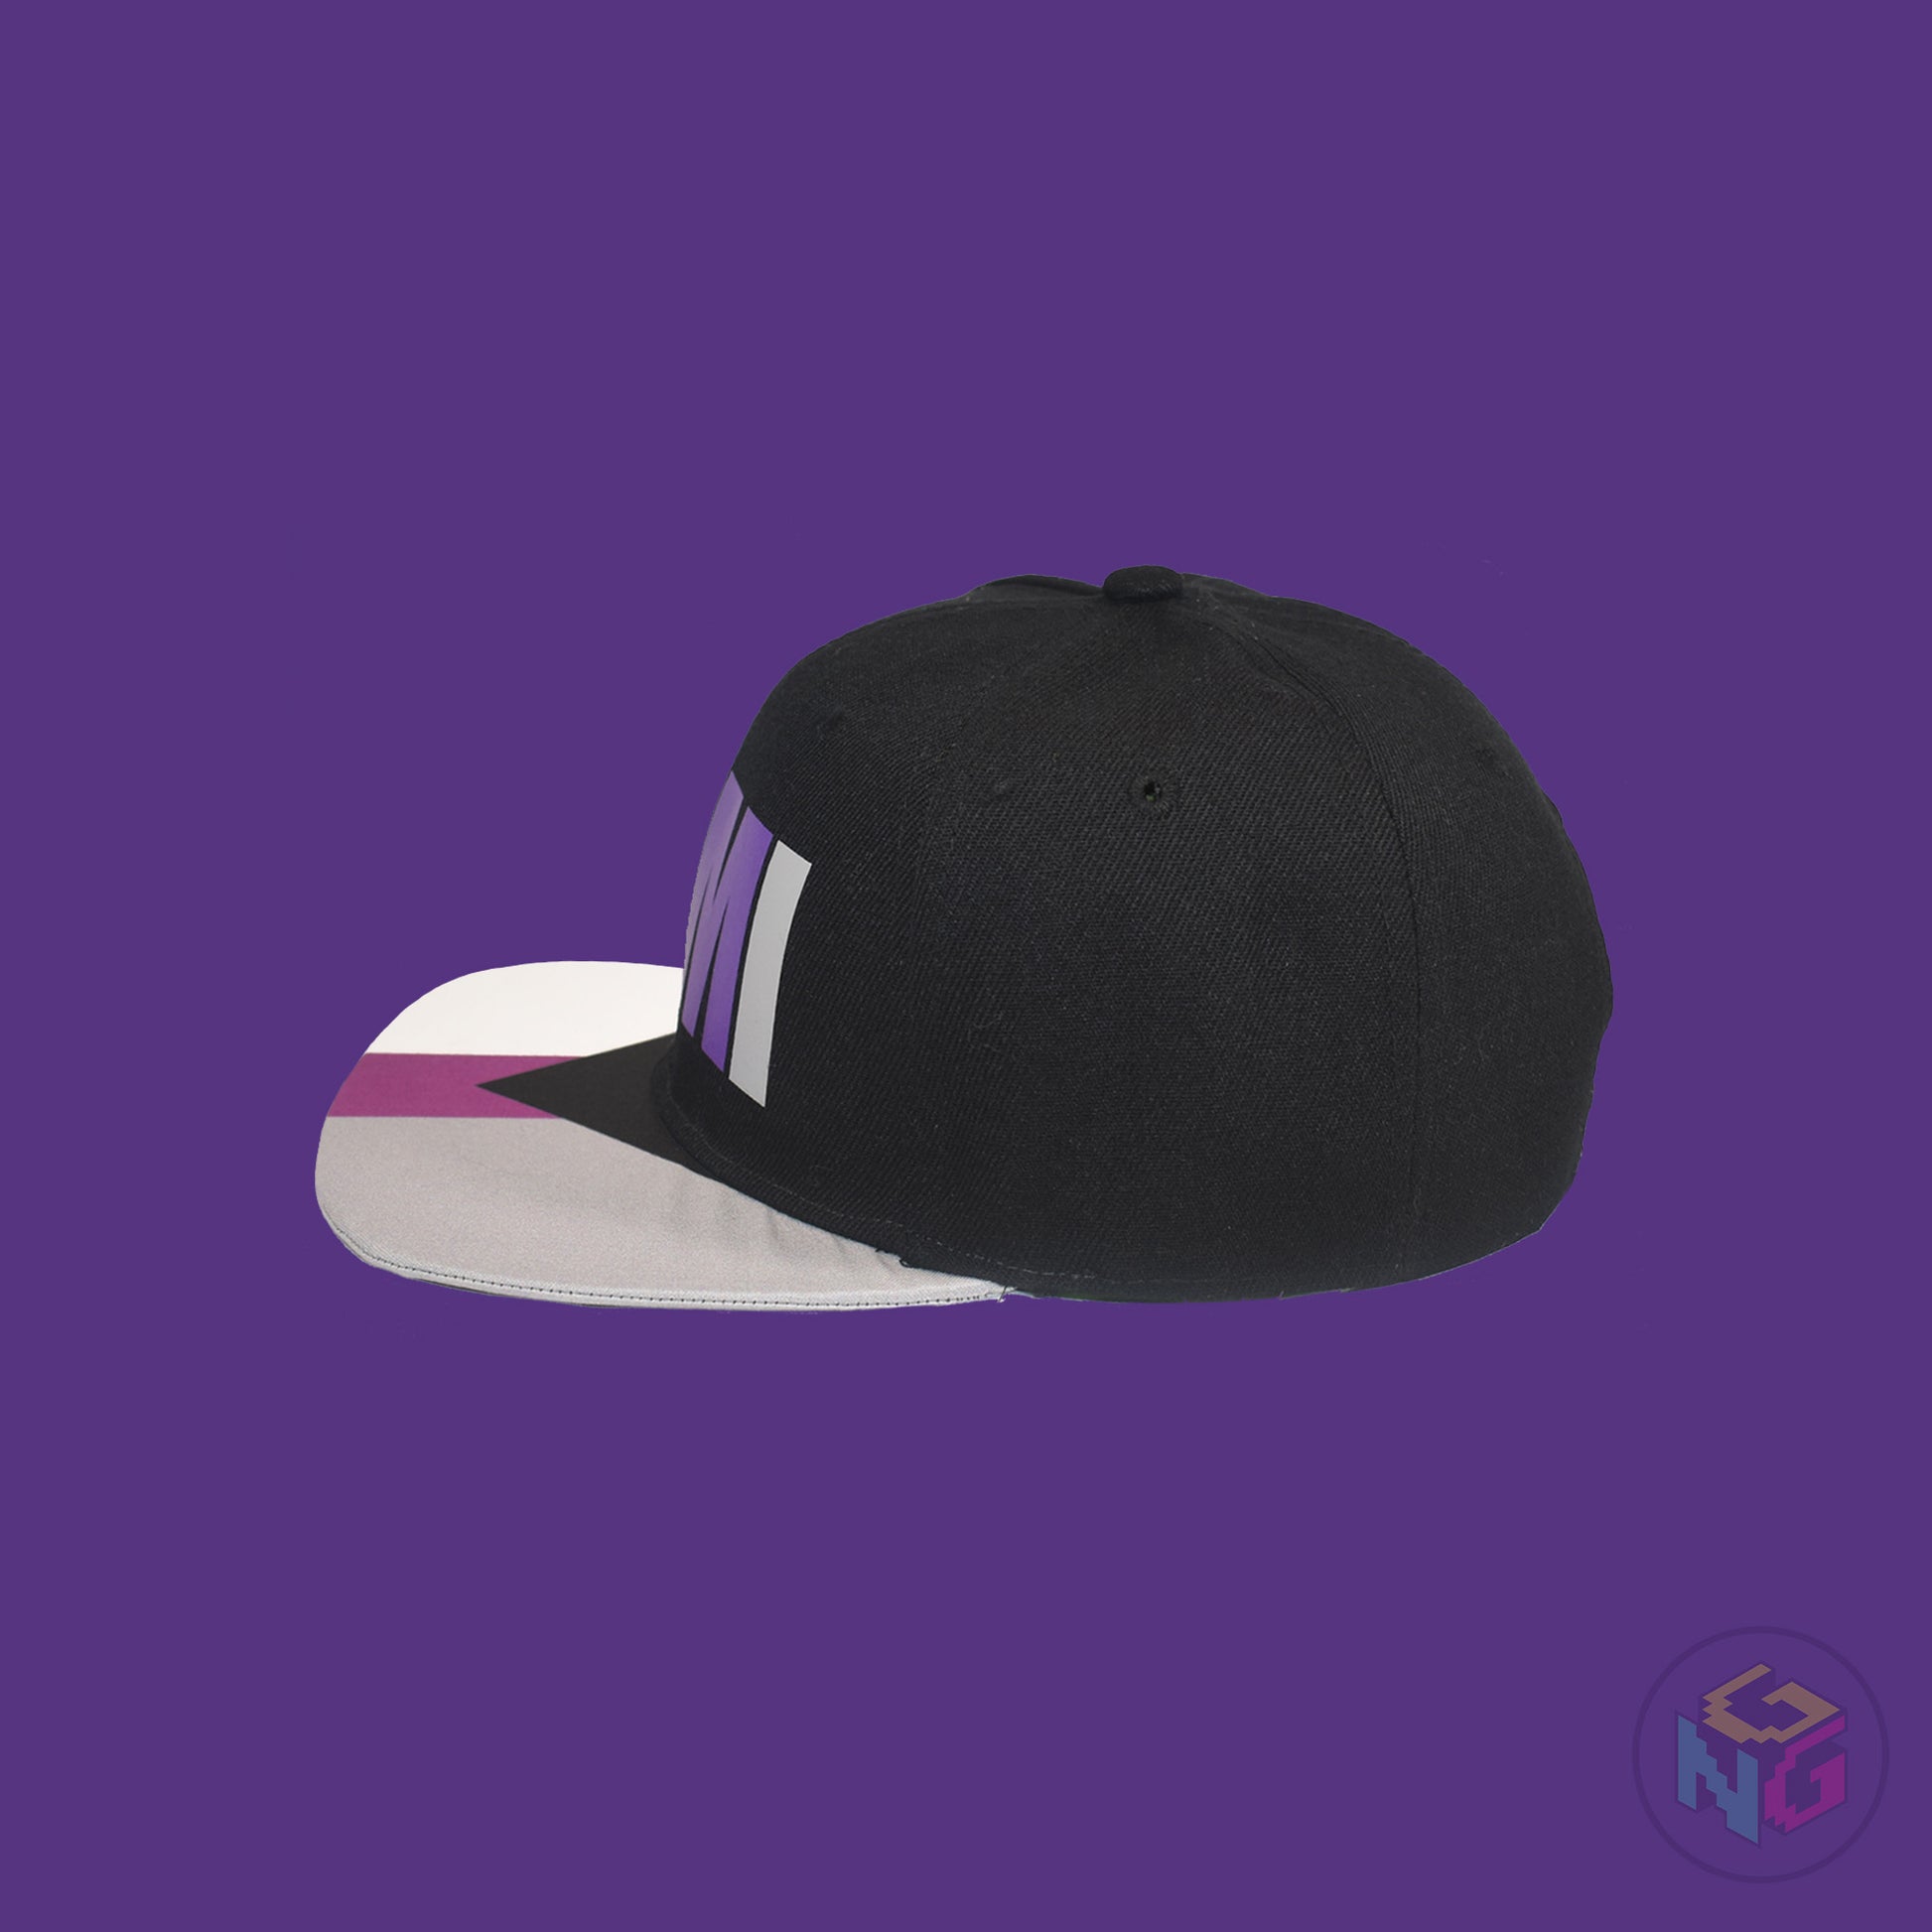 Black flat bill snapback hat. The brim has the demisexual pride flag on both sides and the front of the hat has the word “DEMI” in purple, white, and grey. Left view